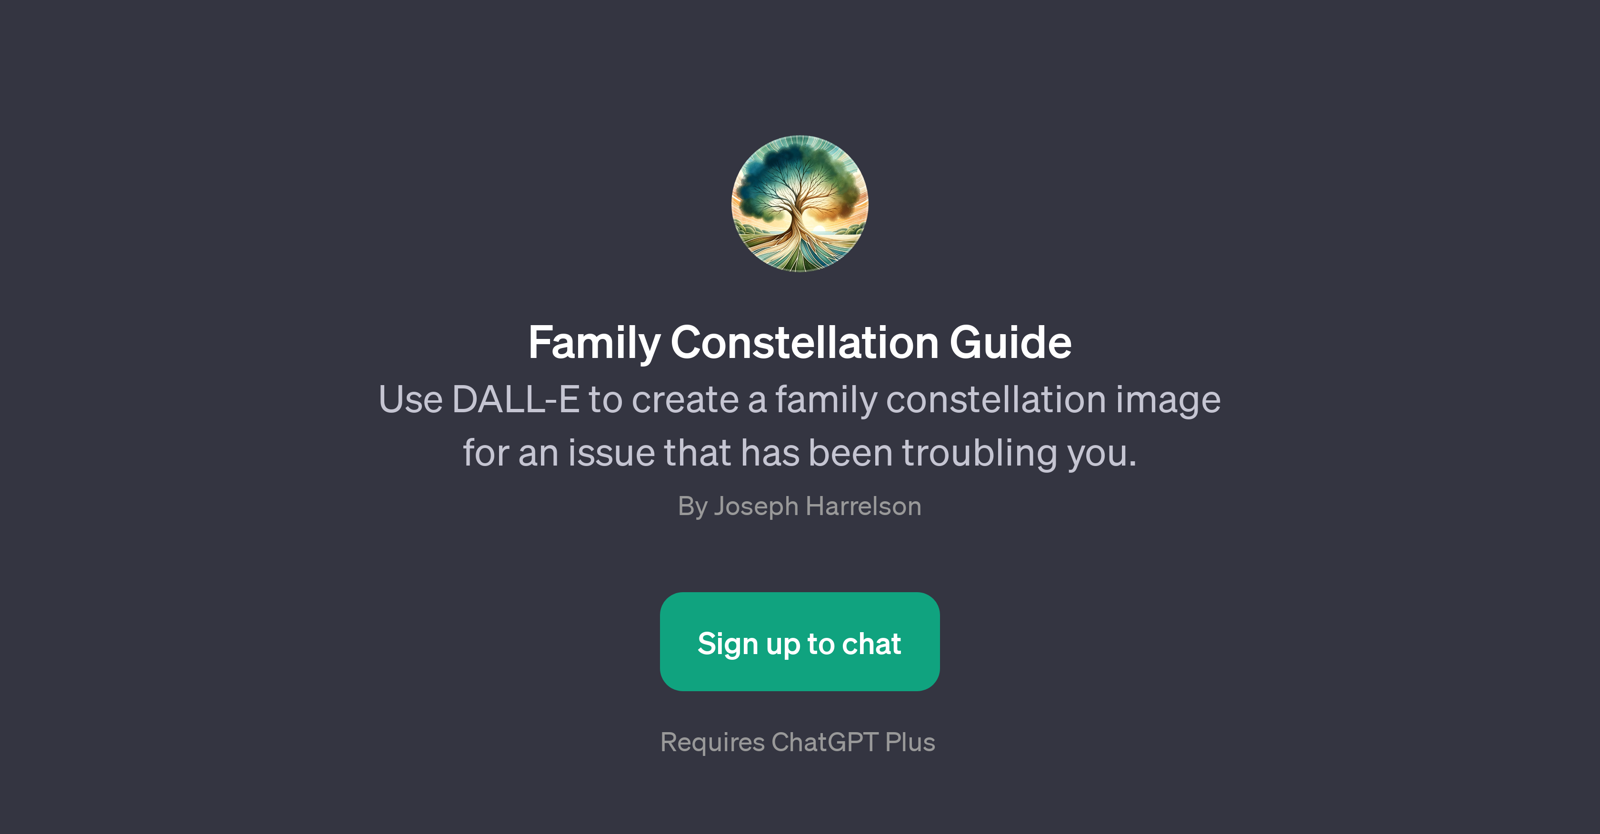 Family Constellation Guide website